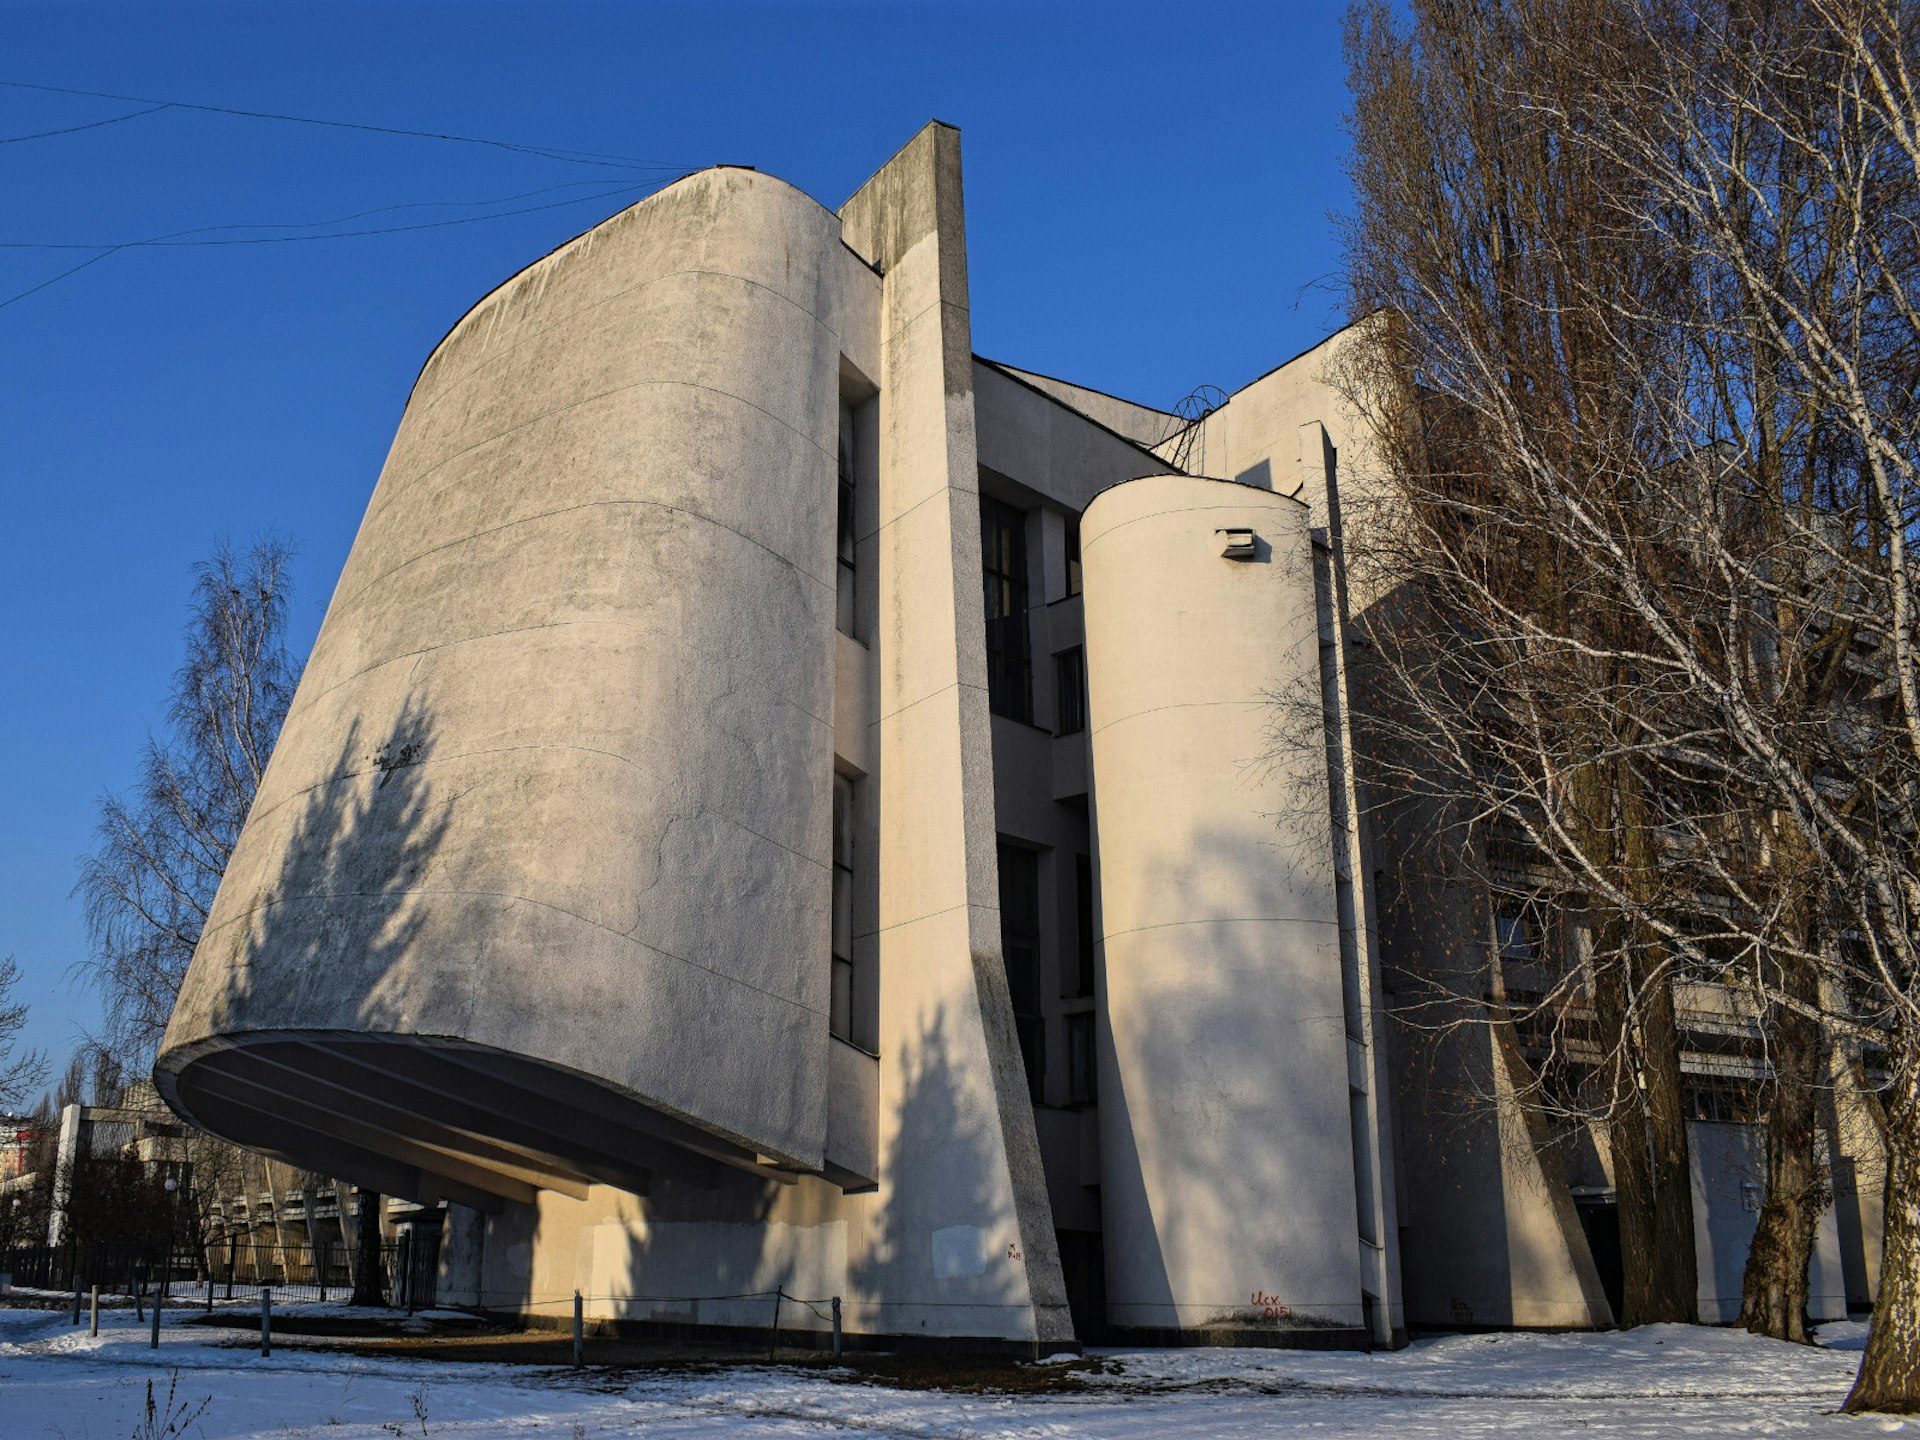 The spaceship-like design of one of the Kyiv National University campuses © Pavlo Fedykovych / Lonely Planet